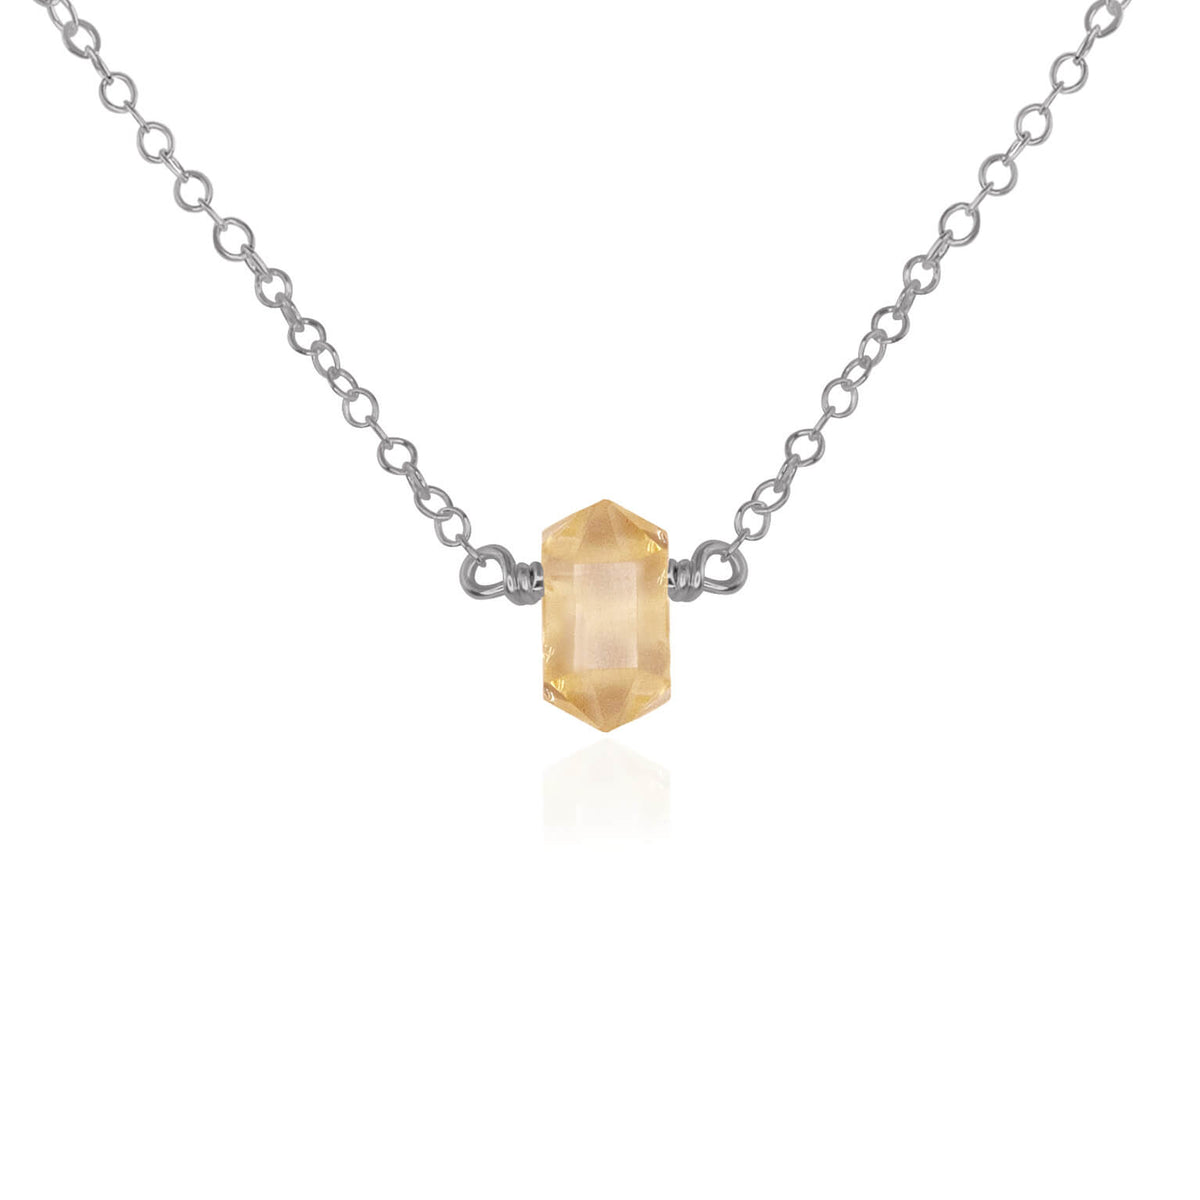 Double Terminated Crystal Necklace - Citrine - Stainless Steel - Luna Tide Handmade Jewellery